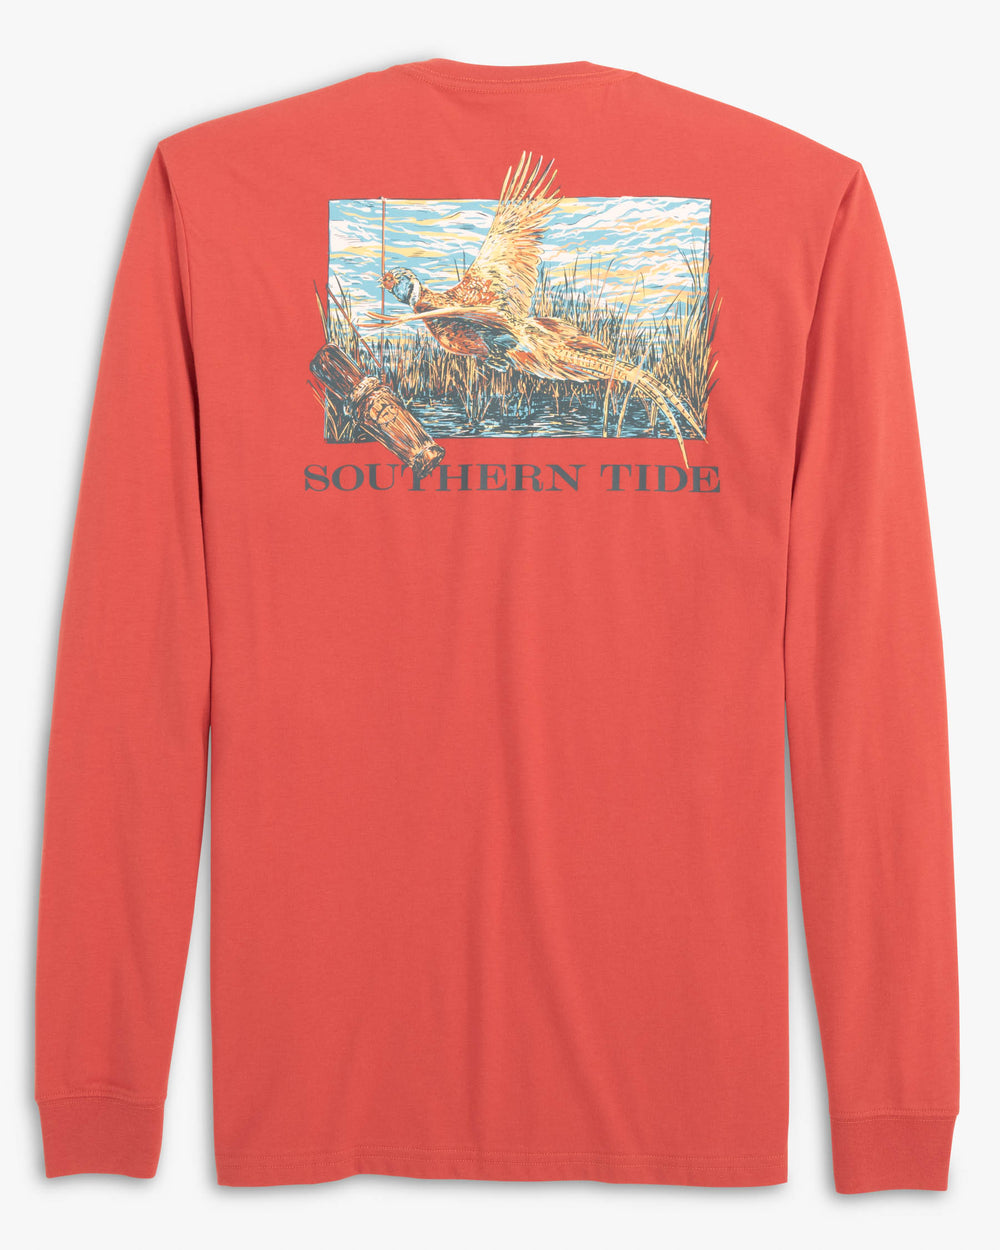 The back view of the Fowl Call Series Long Sleeve T-Shirt Pheasant by Southern Tide - Mineral Red